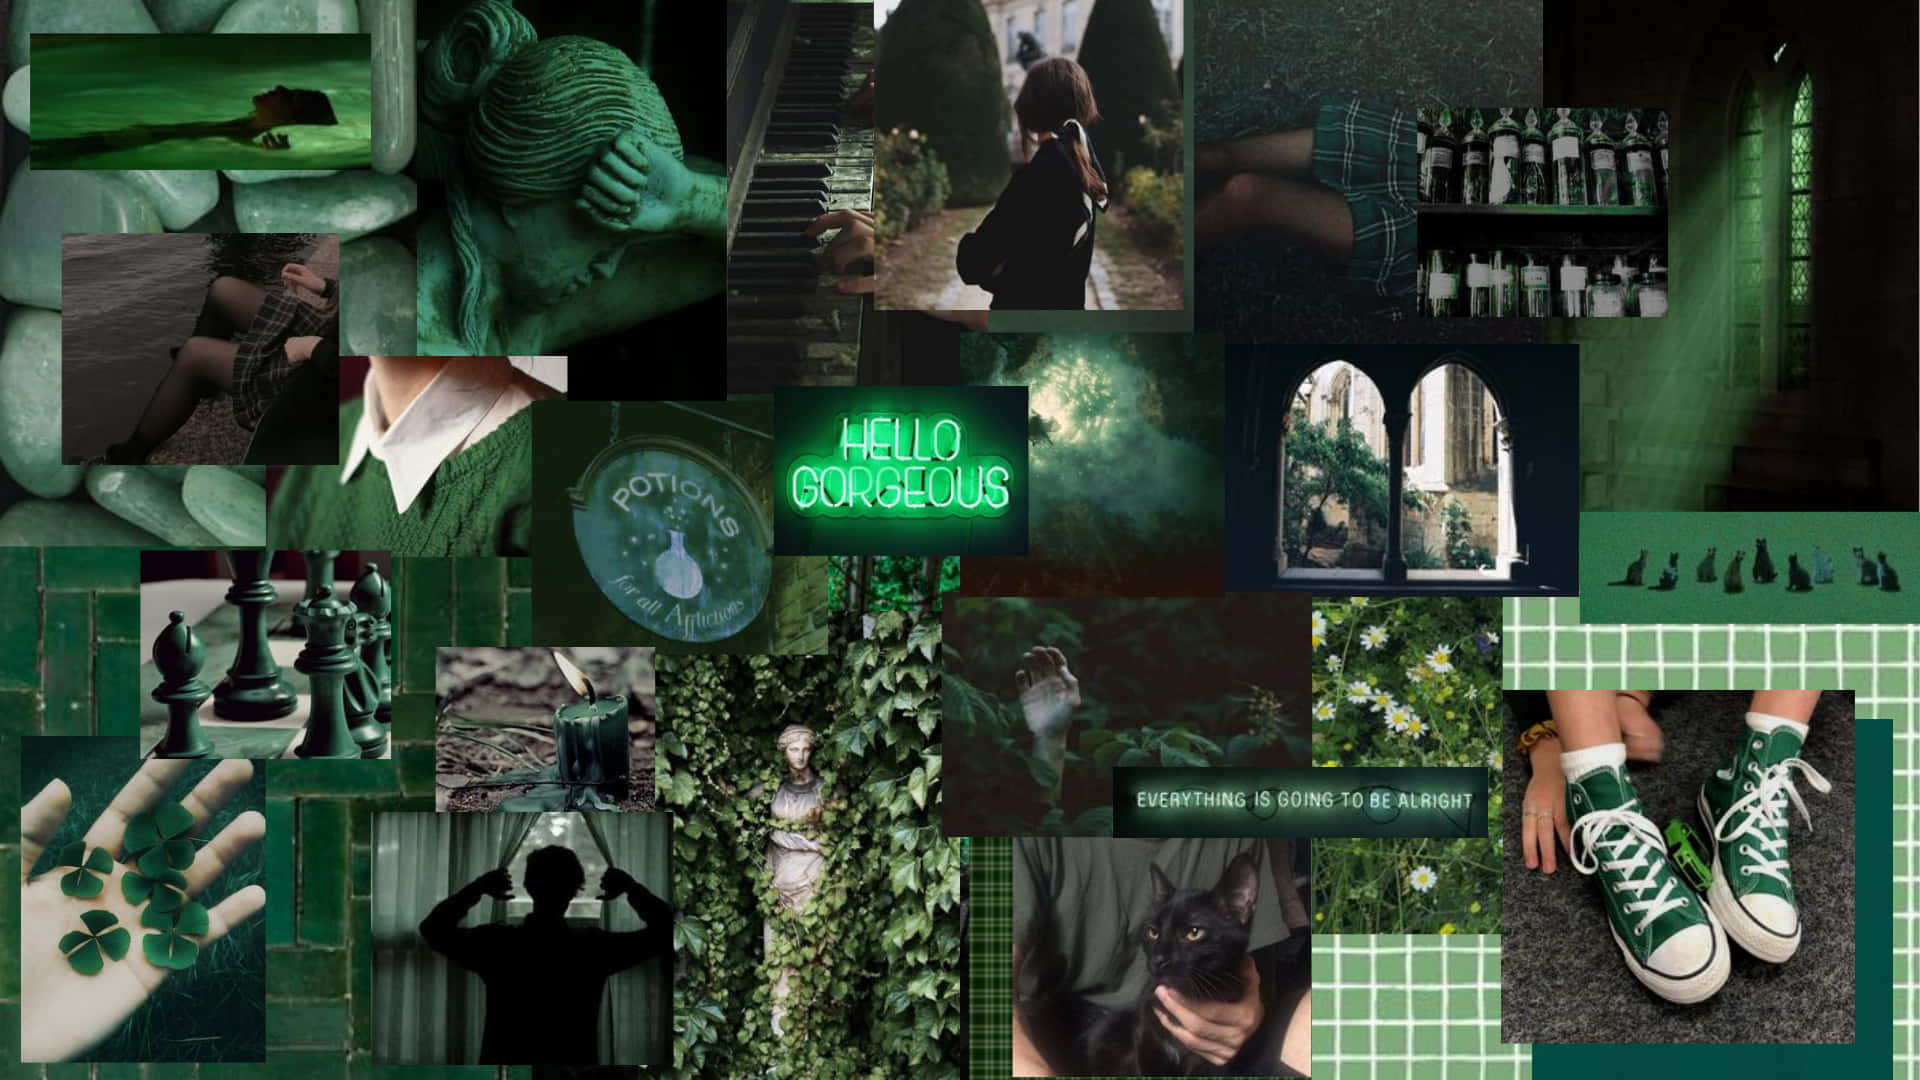 A vibrant green collage of inspiring thoughts and natural elements. Wallpaper